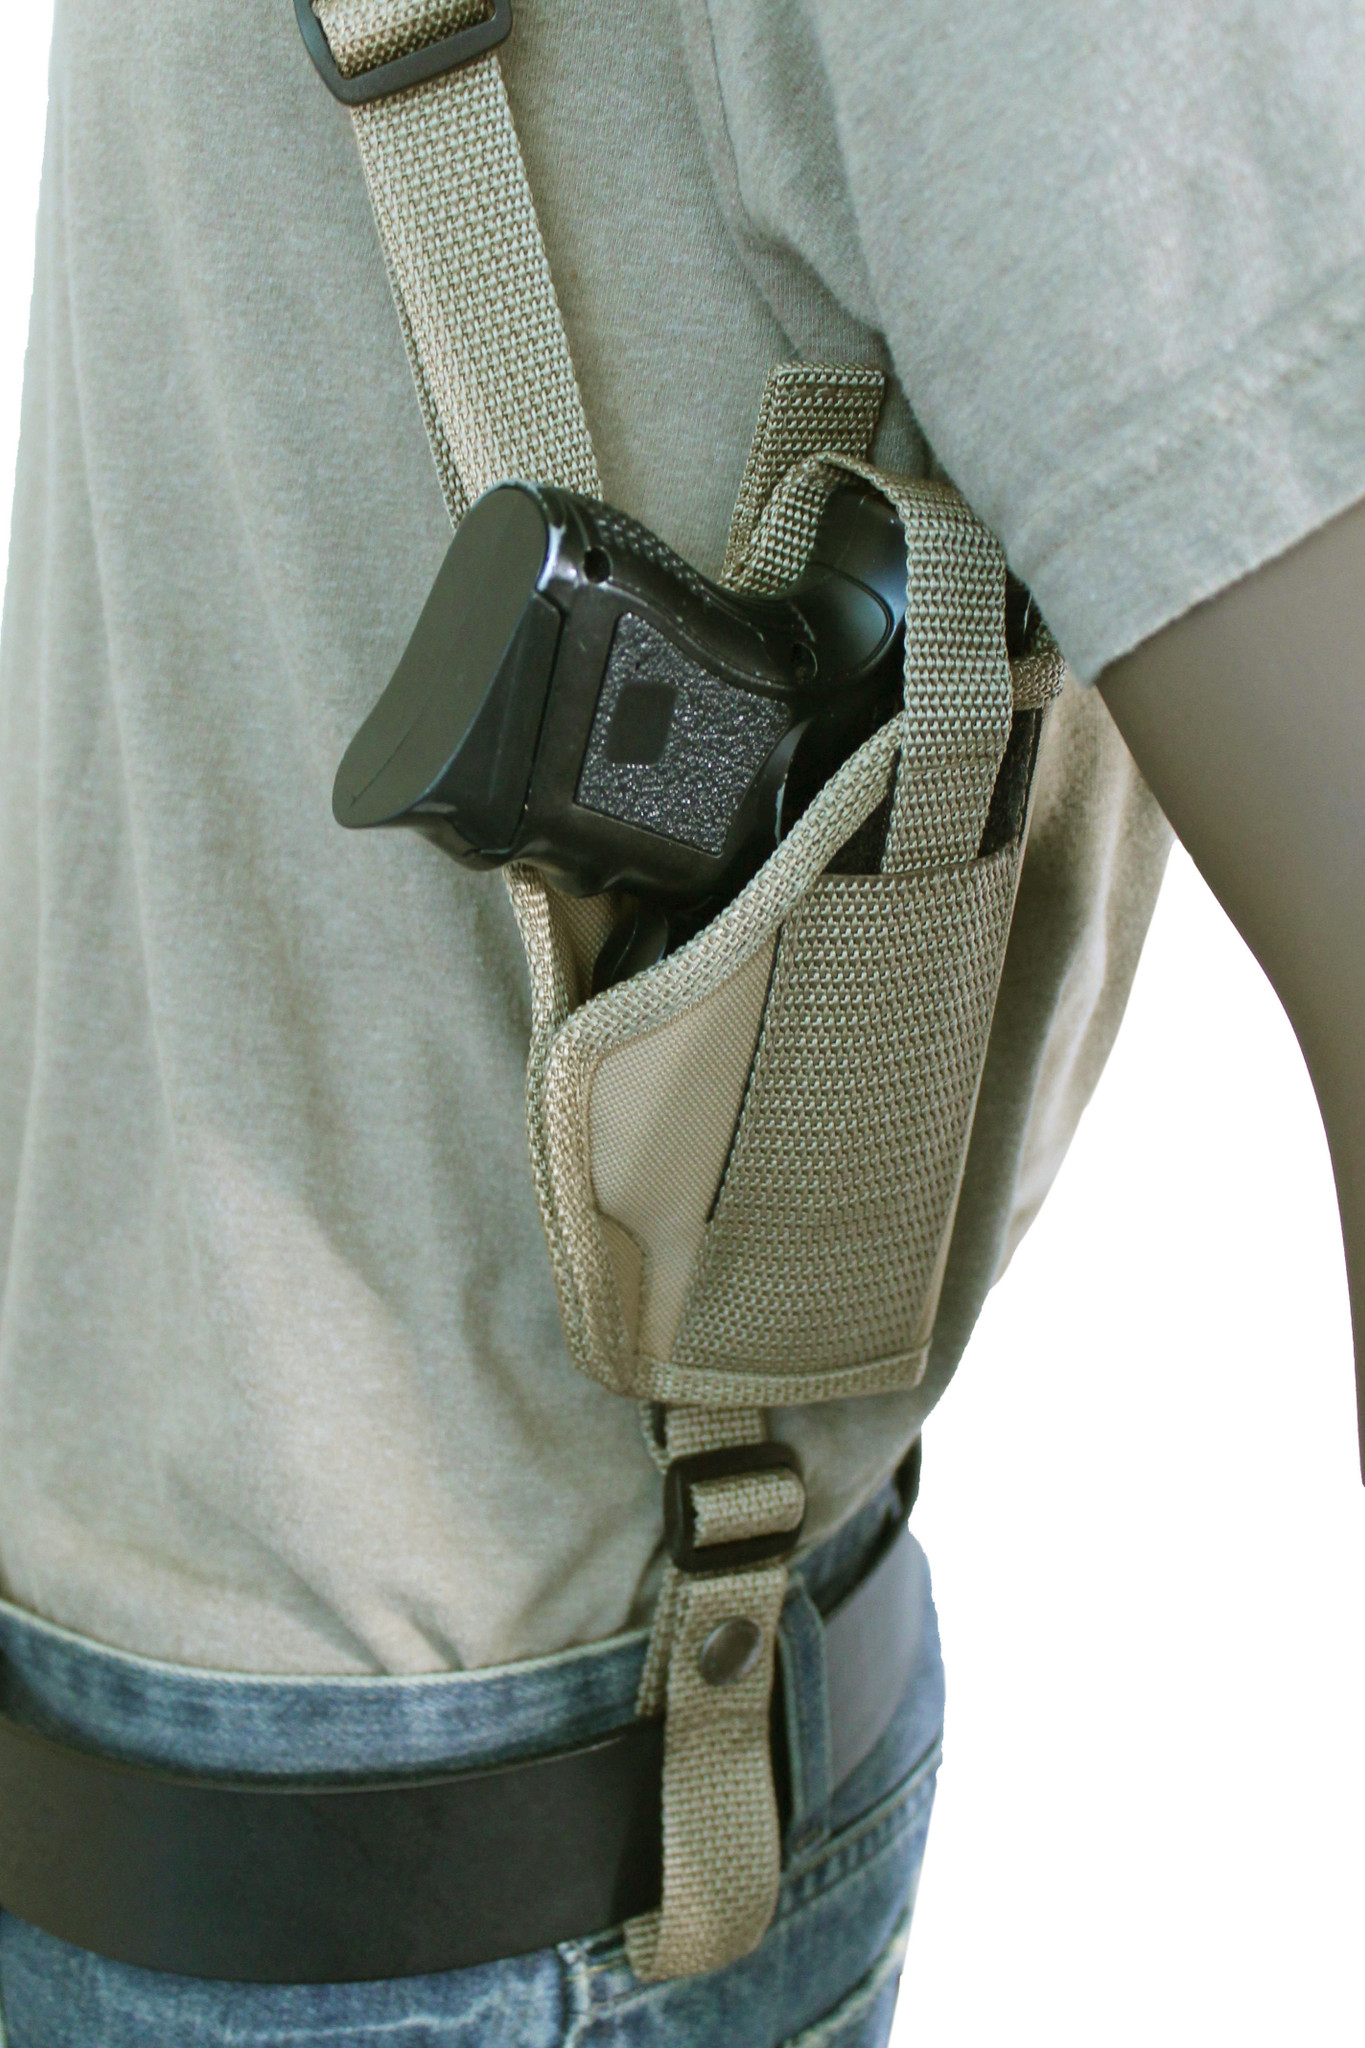 Details about   New Barsony Desert Sand Tuckable Holster for Compact 9mm 40 45 Pistols 